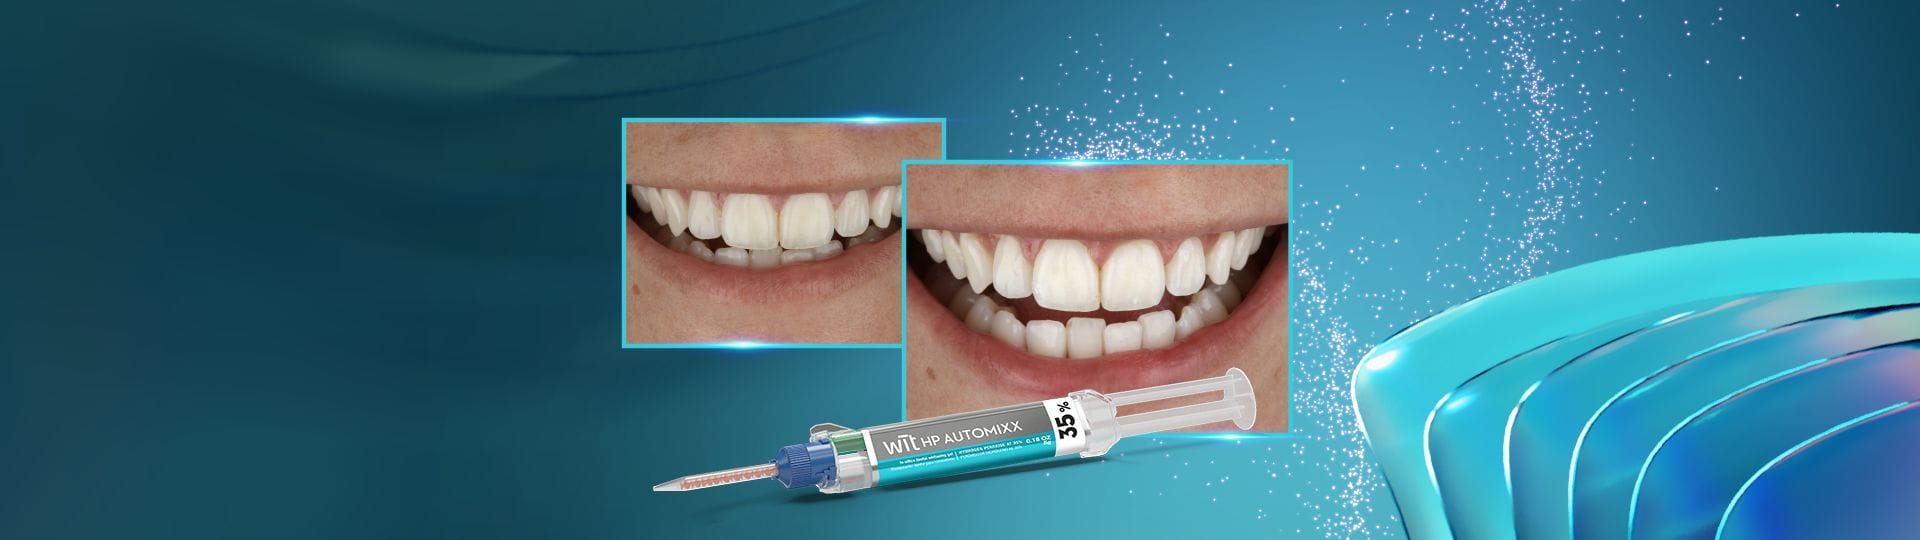 Tooth whitening in the office: a fast and effective alternative for immediate whitening - FGMUS